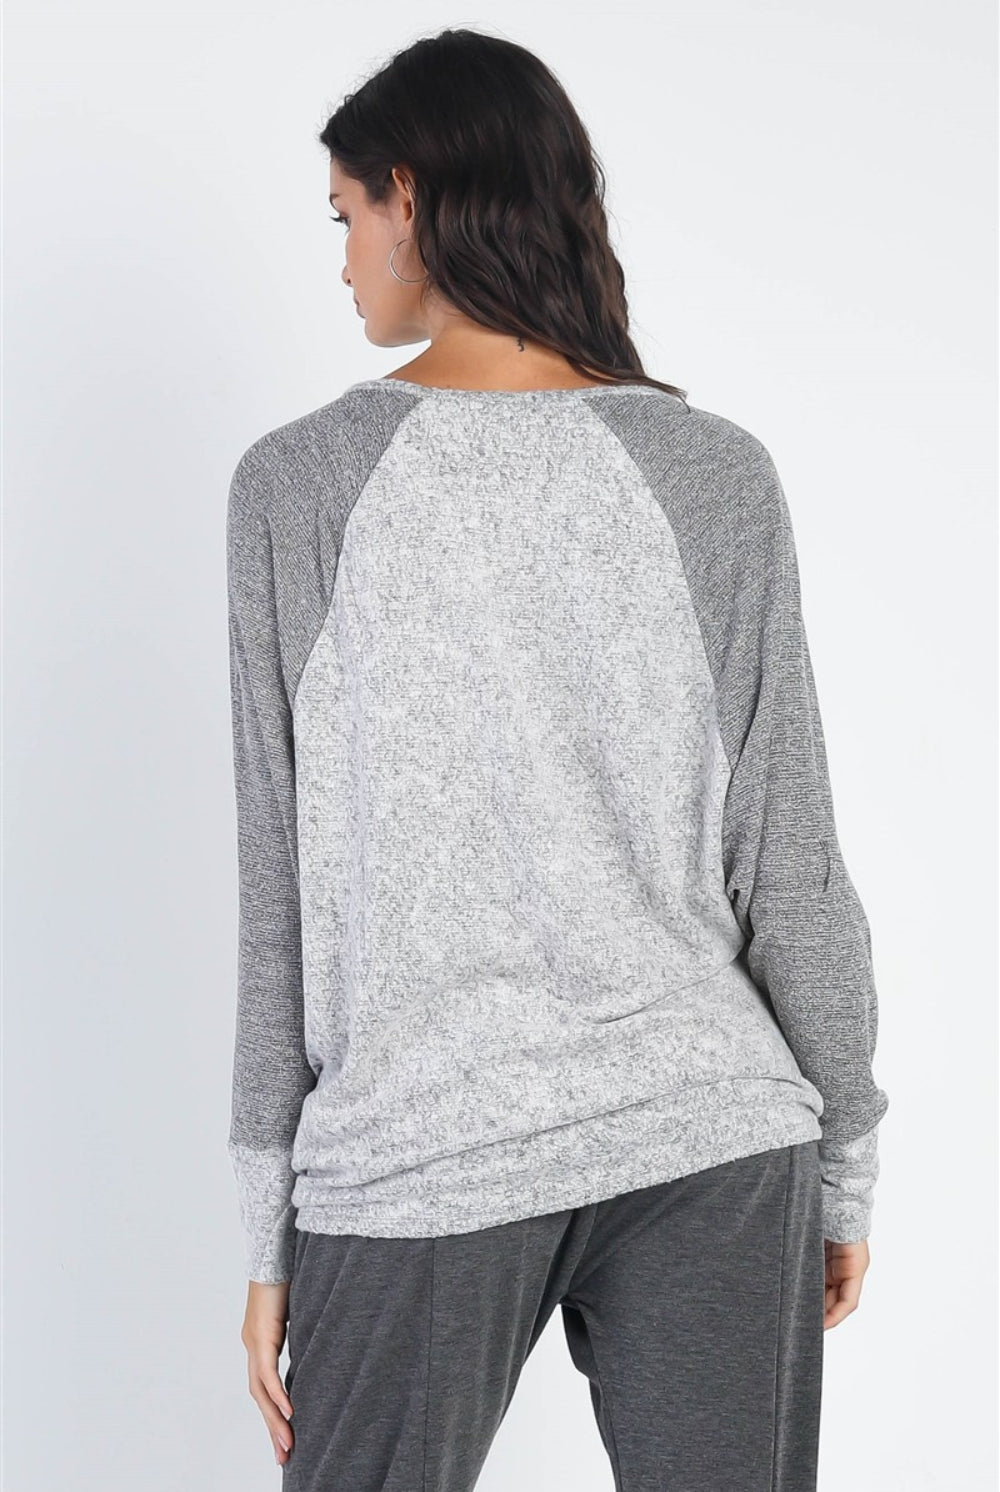 A woman modeling a casual long sleeve contrast top in shades of burgundy and grey, perfect for a stylish yet comfortable outing.